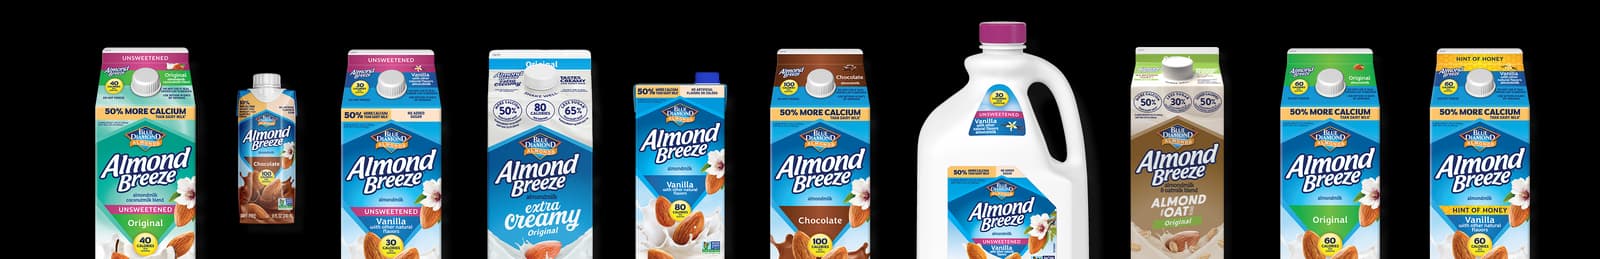 Lineup of various Almond Breeze(R) products in jugs, cartons, and bottles